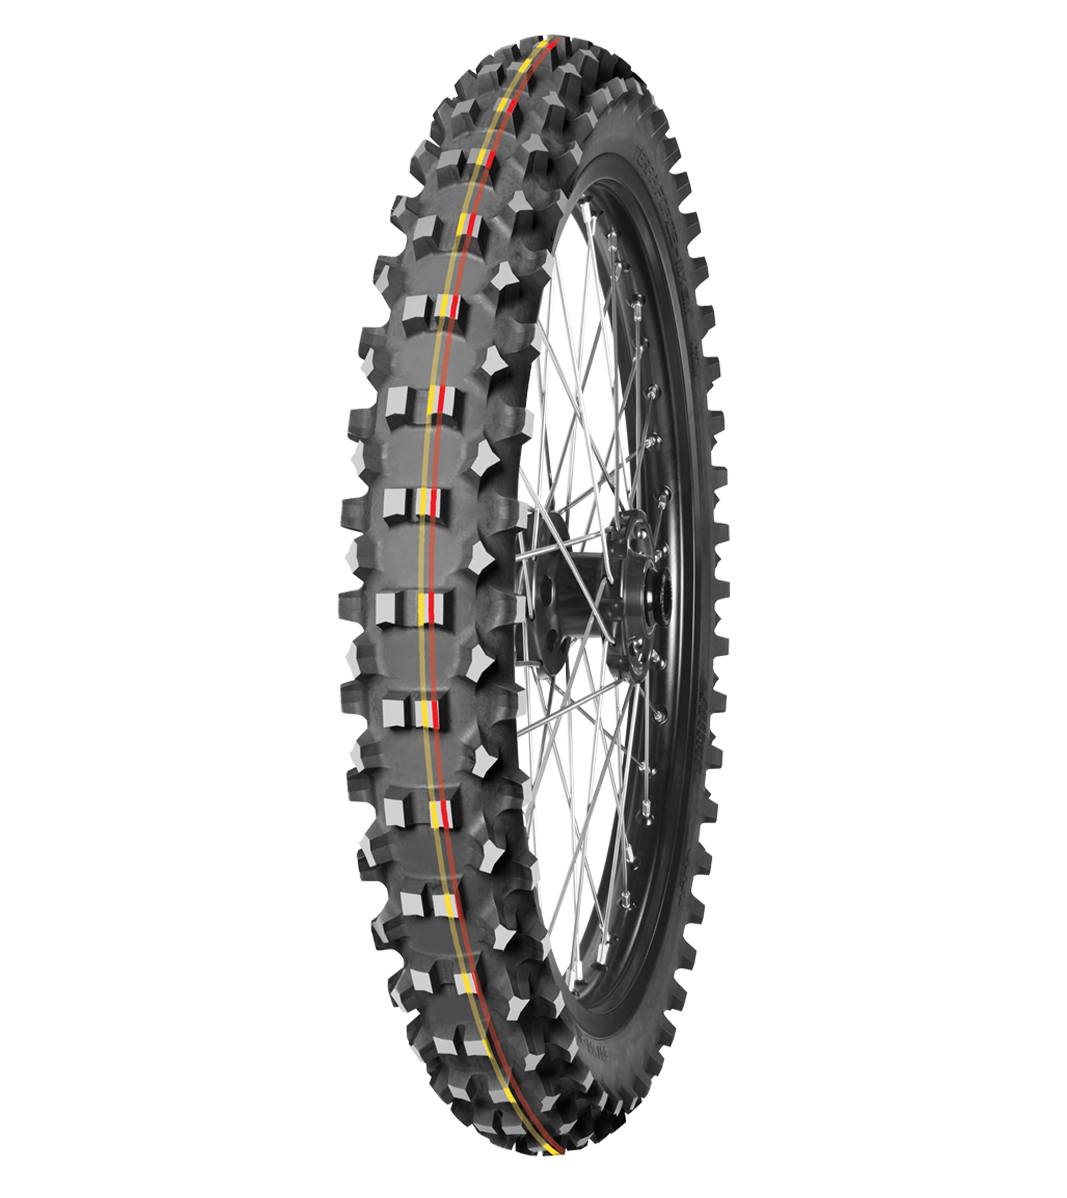 Mitas TERRA FORCE-MX SM 70/100-14 Motocross Competition Off-Road SOFT TO MEDIUM 40M Red &amp; Yellow Tube Front Tire, 226157, 70/100-14, Front, Motocross, Motocross Competition, Off-Road, Terra Force, Terra Force-MX SM, Trail, Tires - Imported and distributed in North &amp; South America by Lindeco Genuine Powersports - Premier Powersports Equipment and Accessories for Motorcycle Enthusiasts, Professional Riders and Dealers.